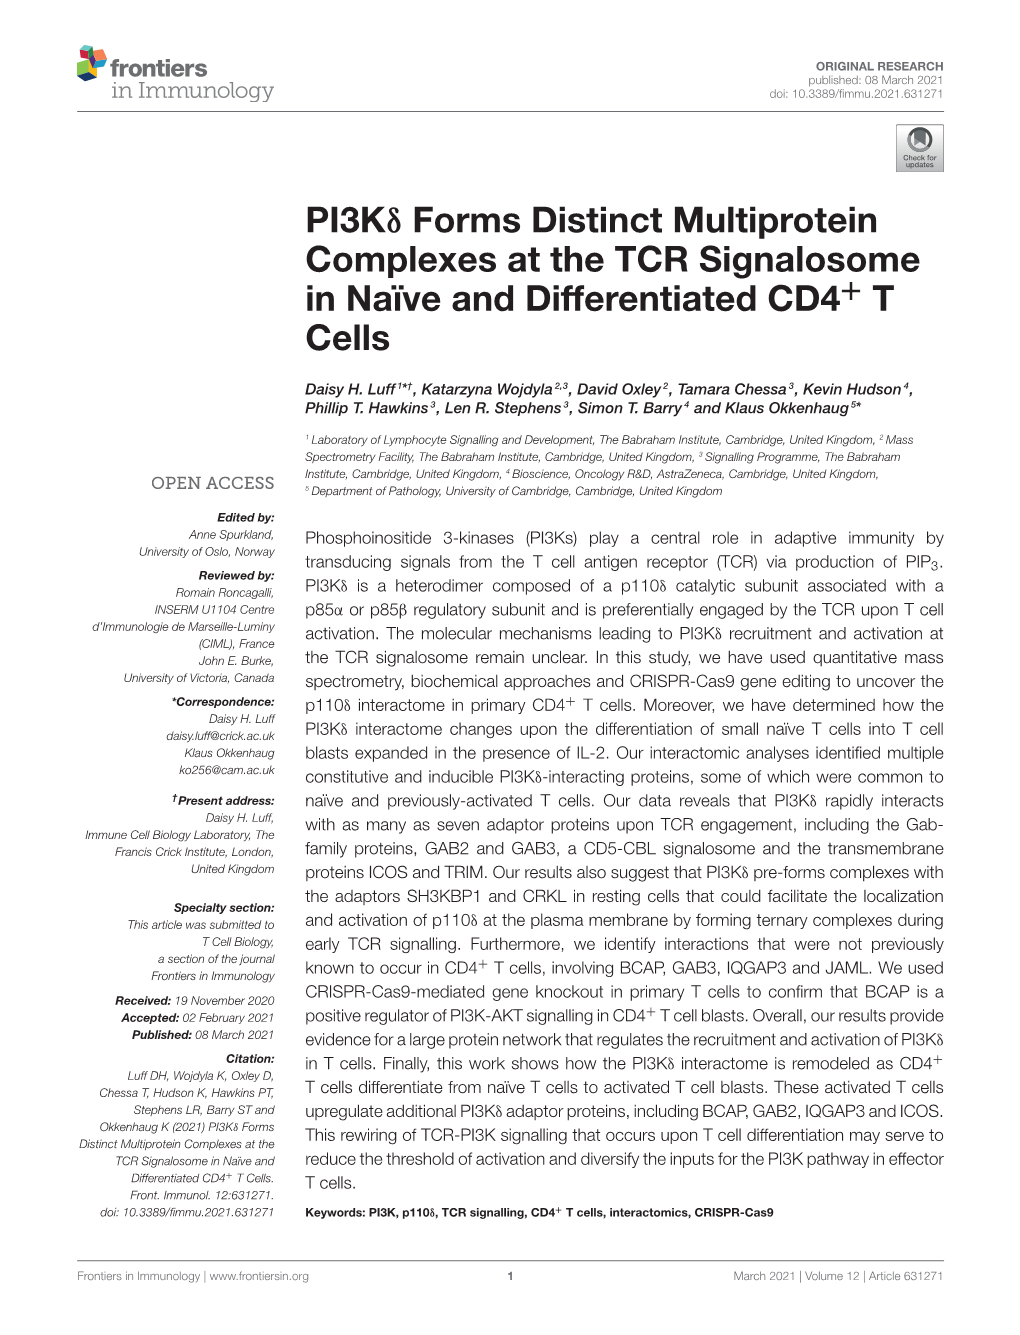 Pi3kδ Forms Distinct Multiprotein Complexes at the TCR Signalosome in Naïve and Differentiated CD4+ T Cells